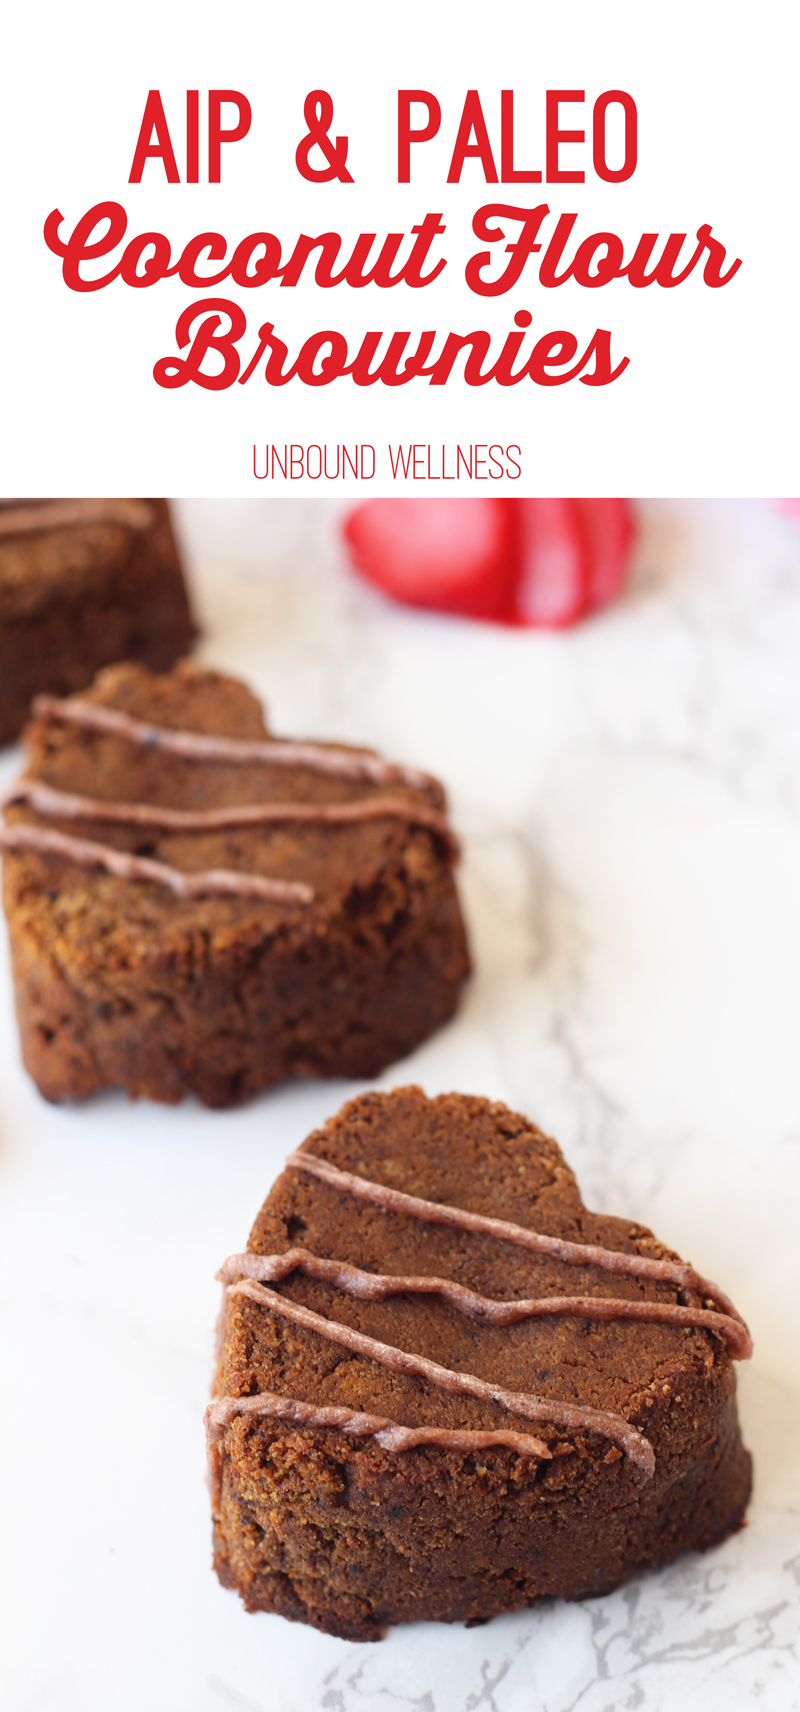 AIP Coconut Flour Brownies (perfect for Valentine's Day!)